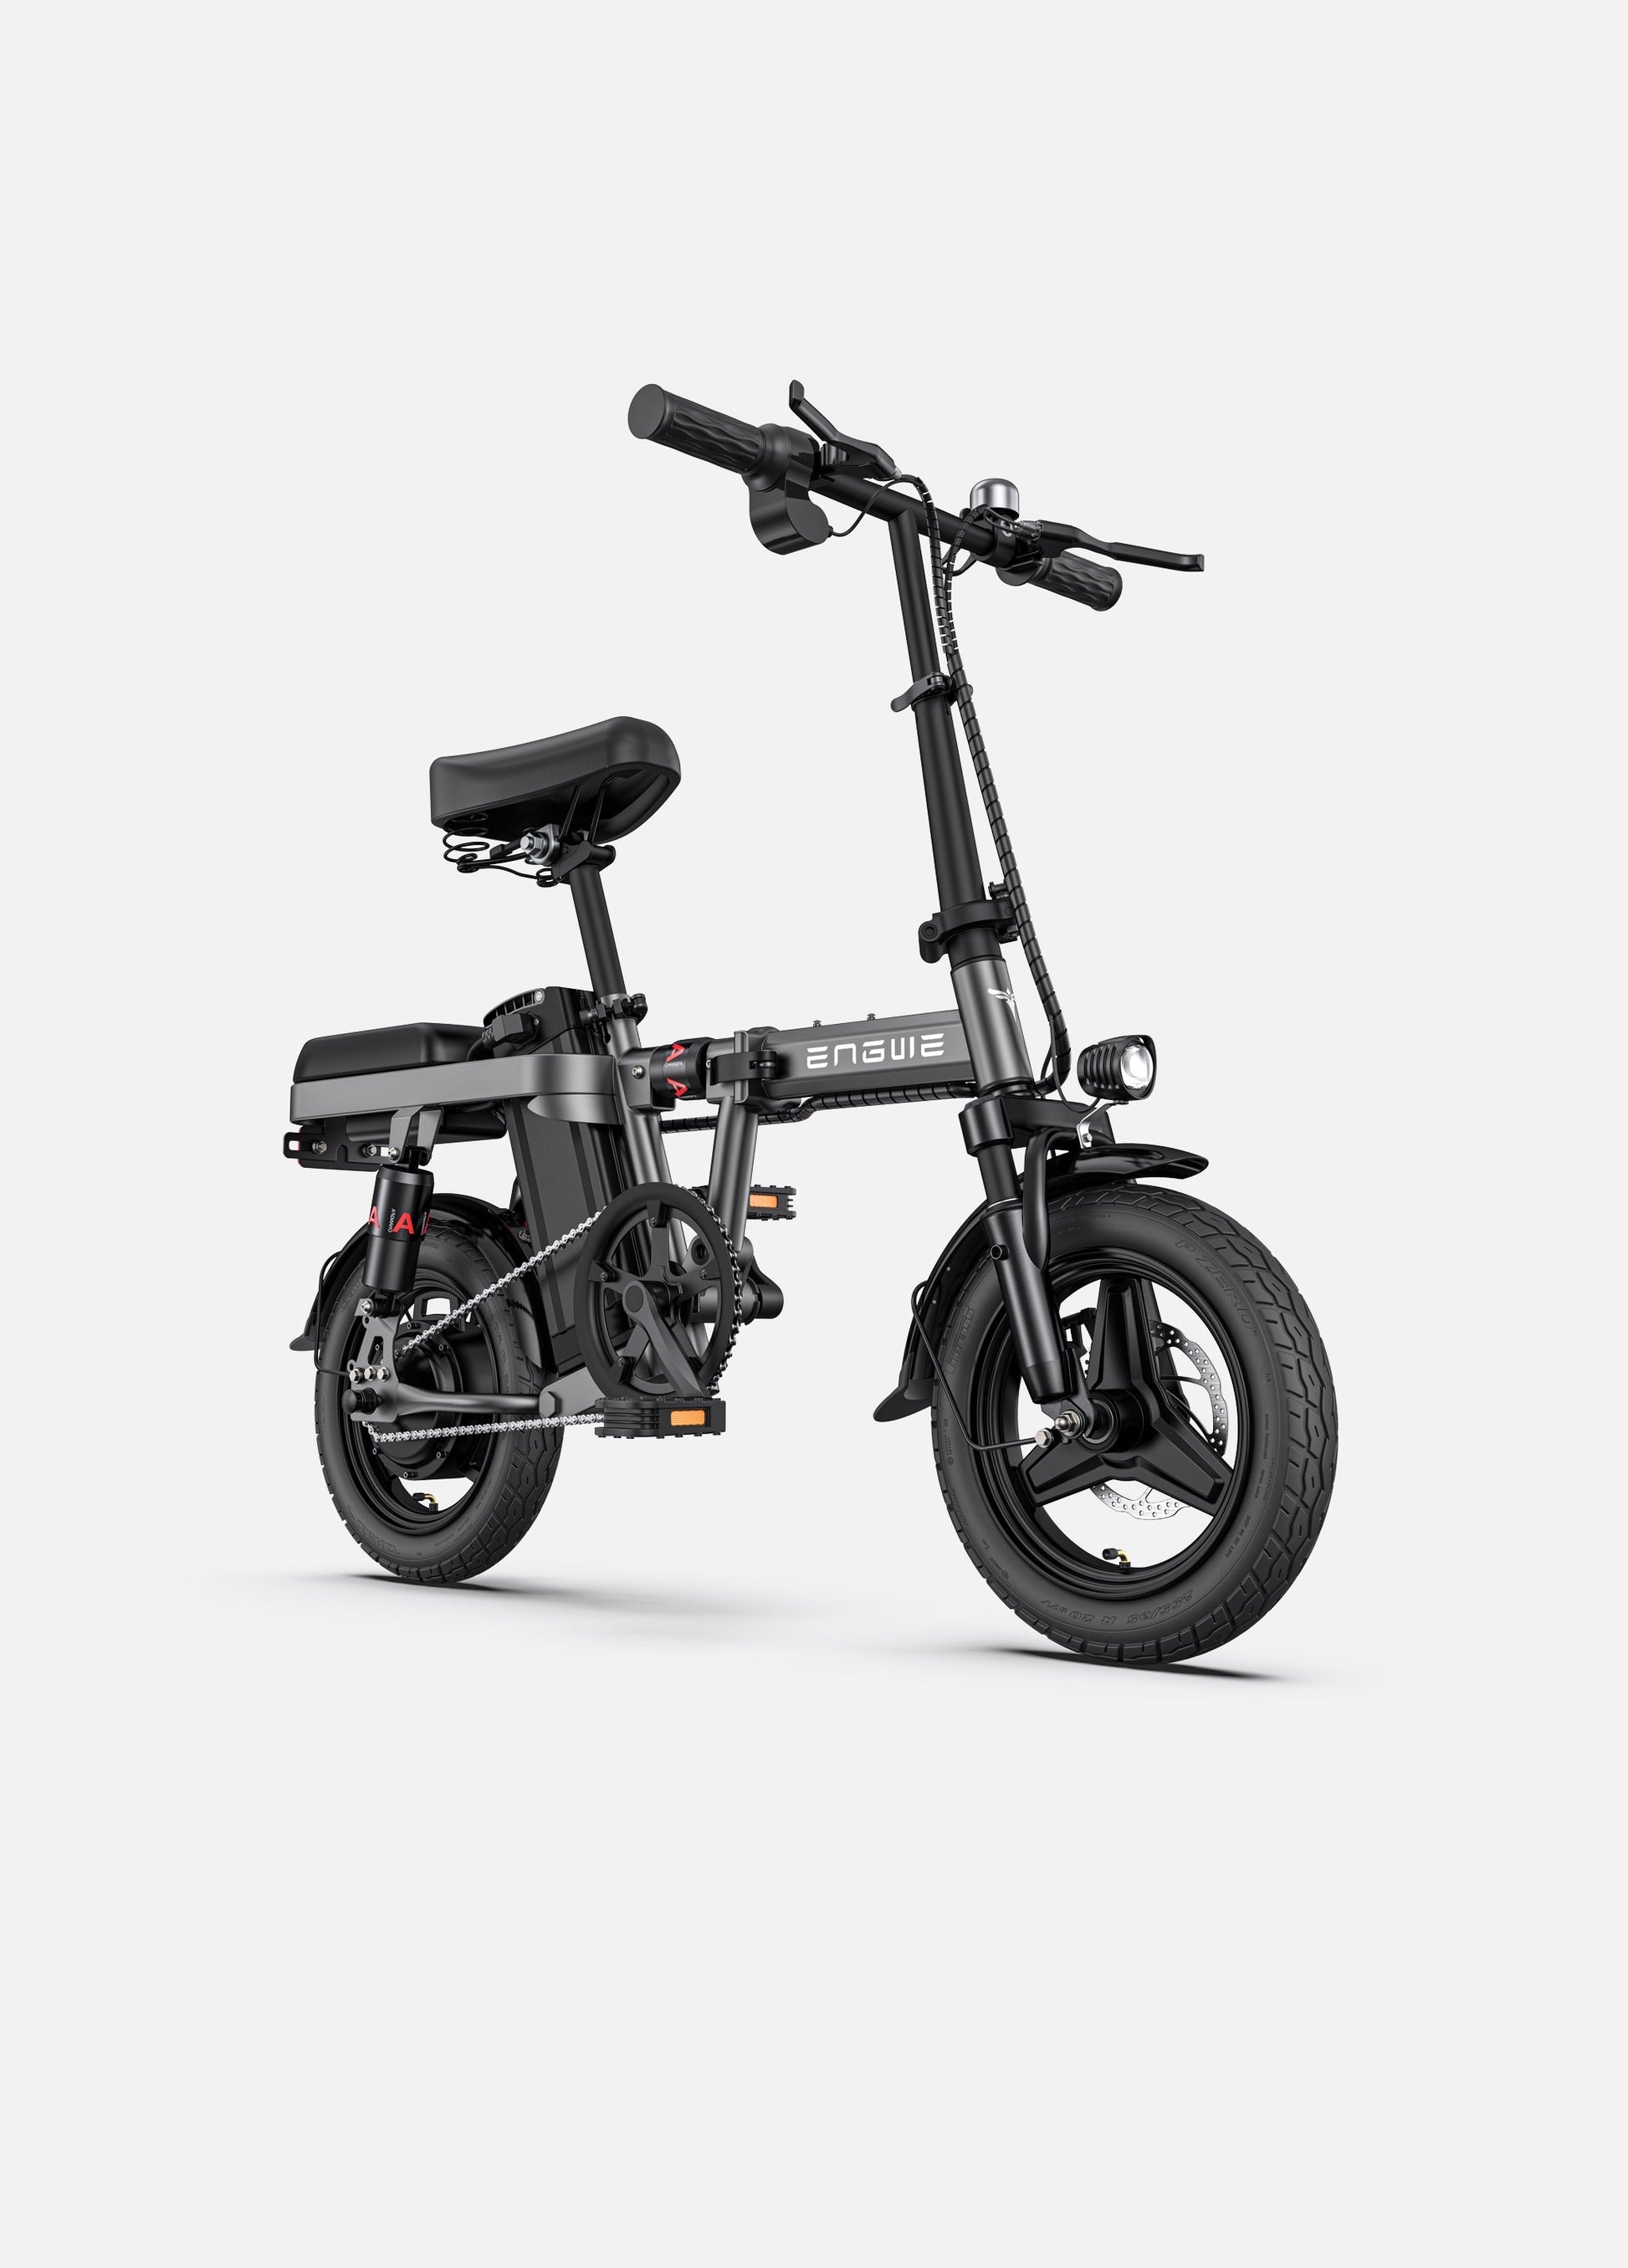 Grey Engwe T14 folding ebike, demonstrating the versatility and urban appeal of this modern electric bicycle.